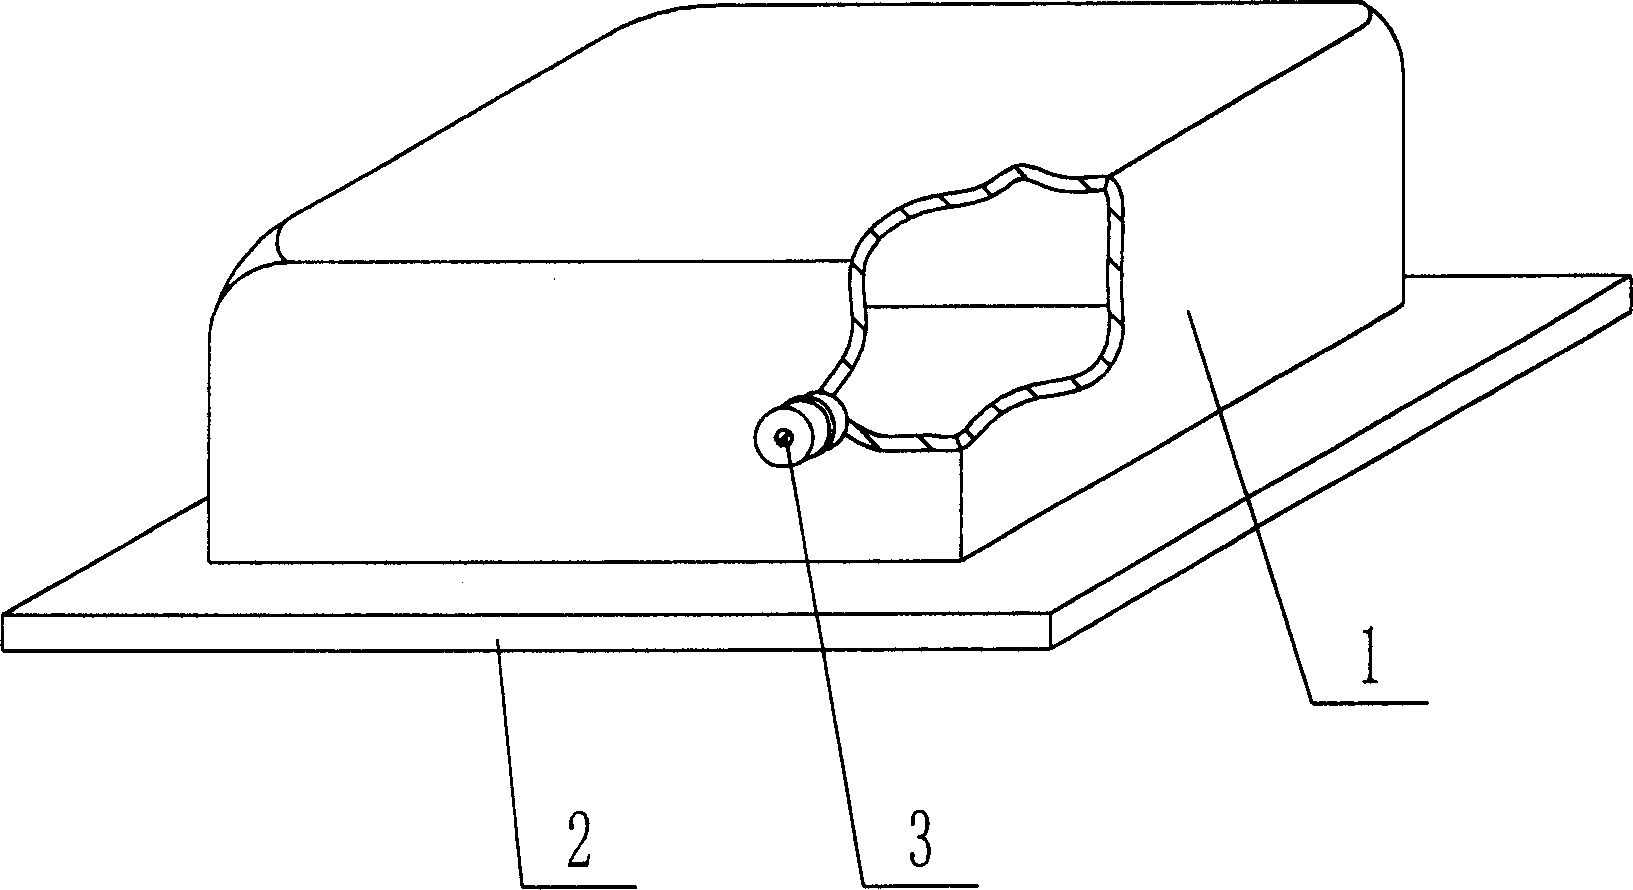 Cavity structural component